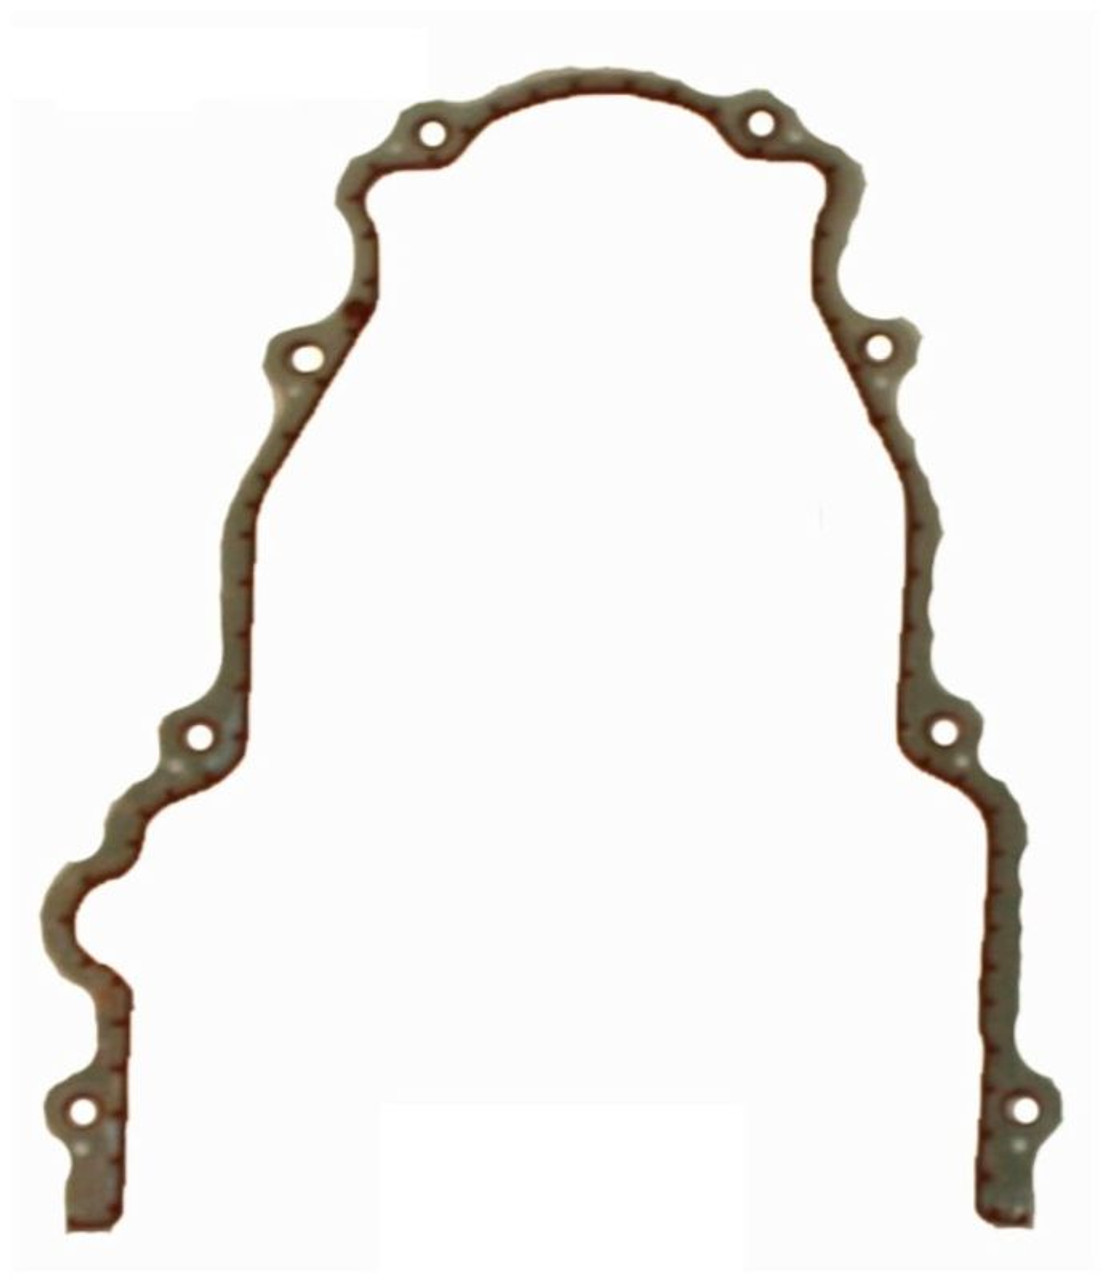 2005 Cadillac Escalade EXT 6.0L Engine Timing Cover Gasket TCG293-A -246